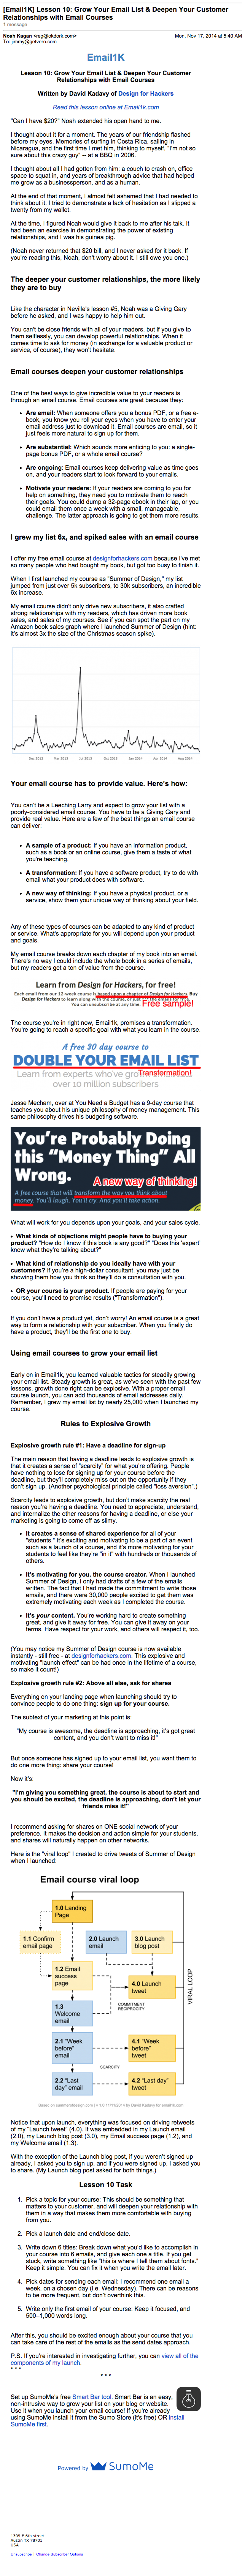 Email_1k_Course_Email